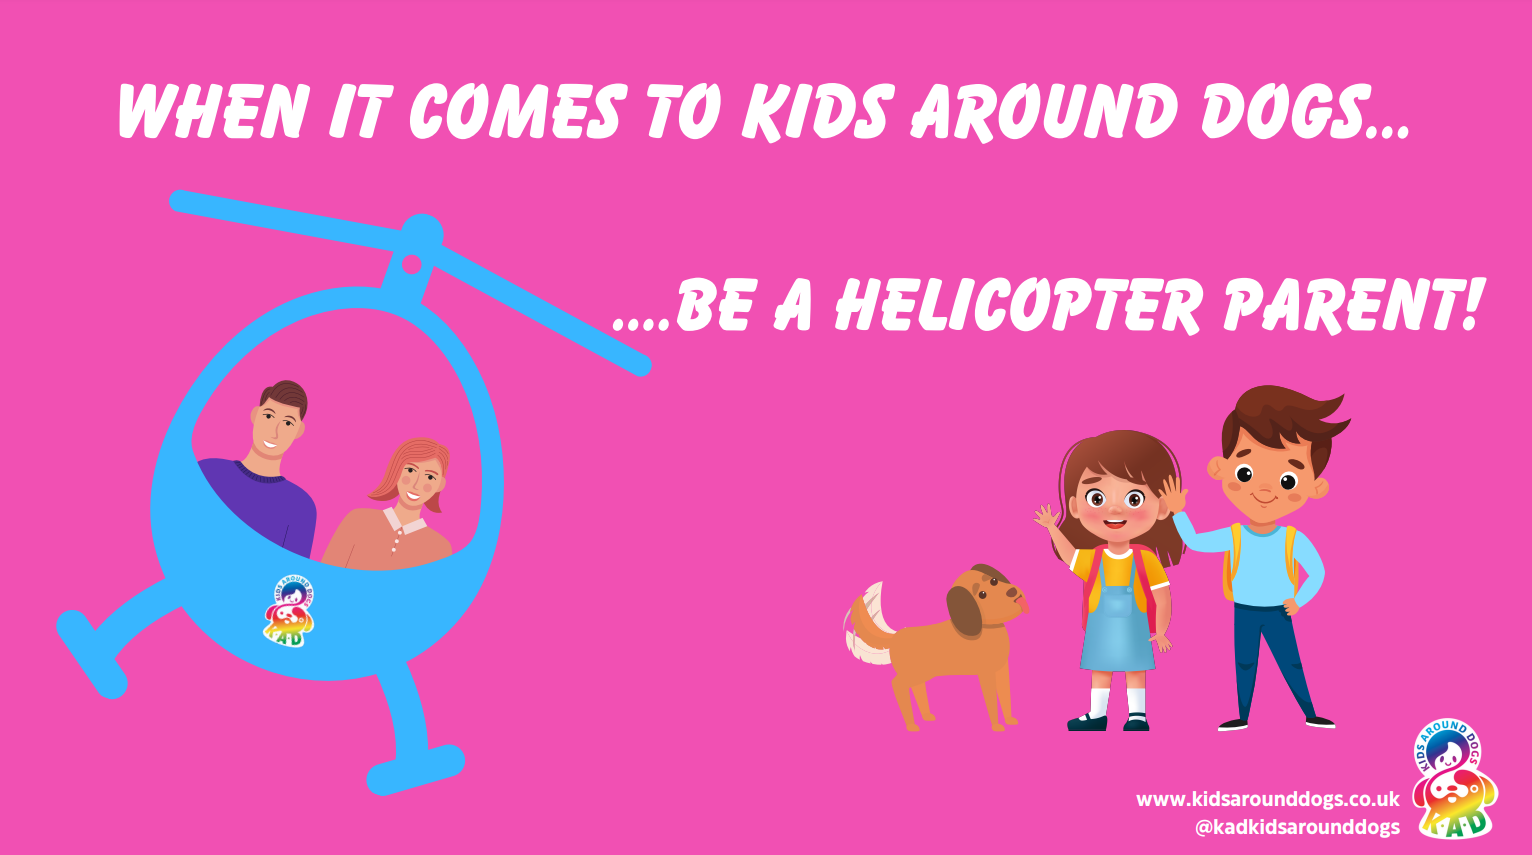 Be a Helicopter Parent!